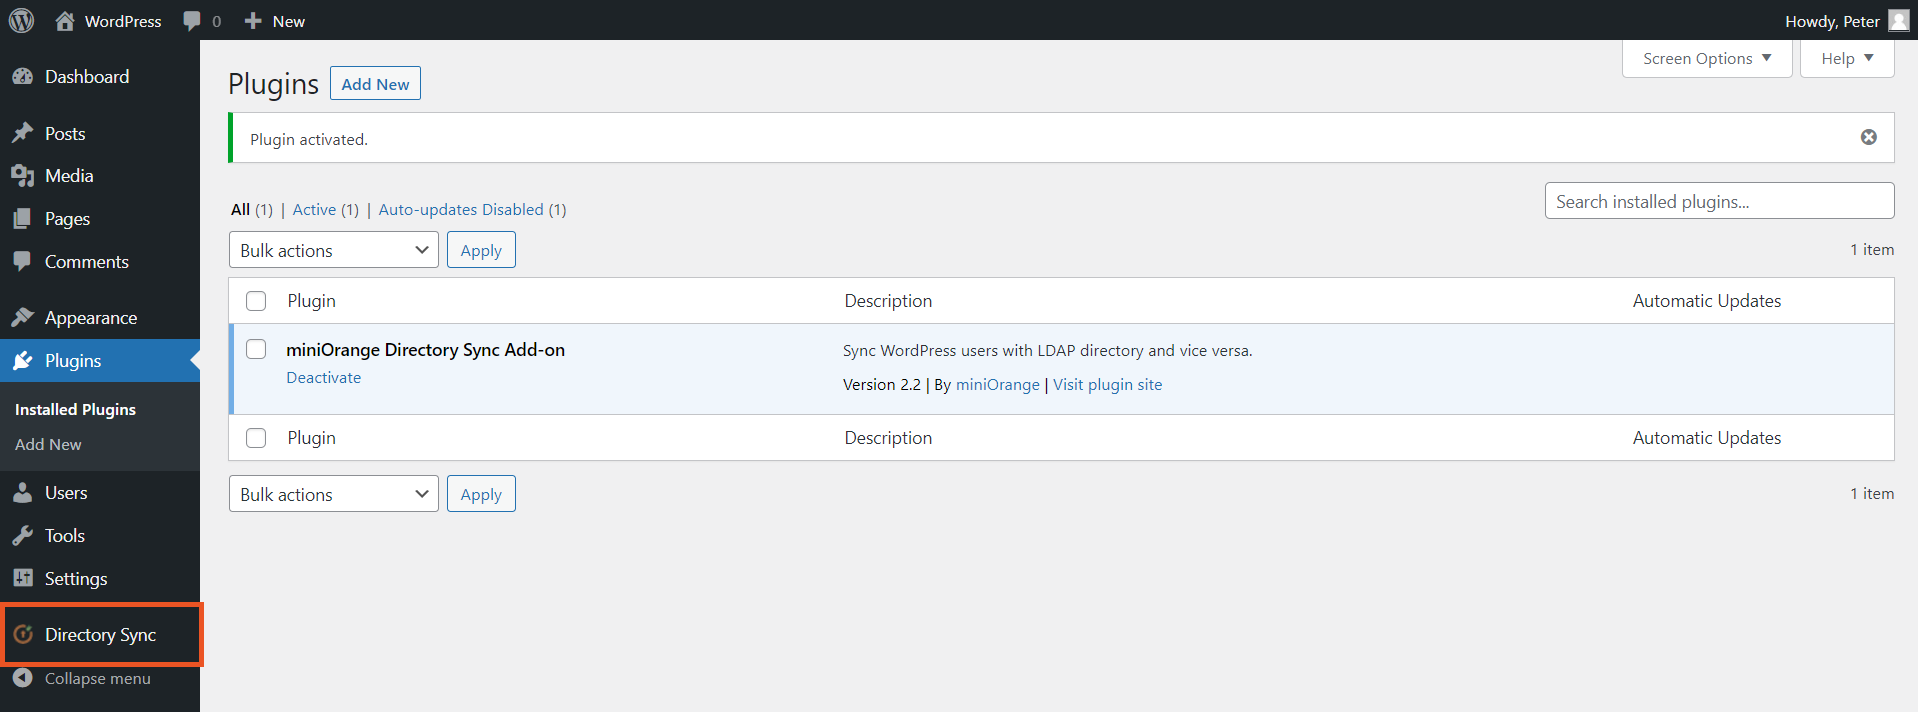 LDAP/active directory login for intranet sites directory sync add-on available in the dashboard